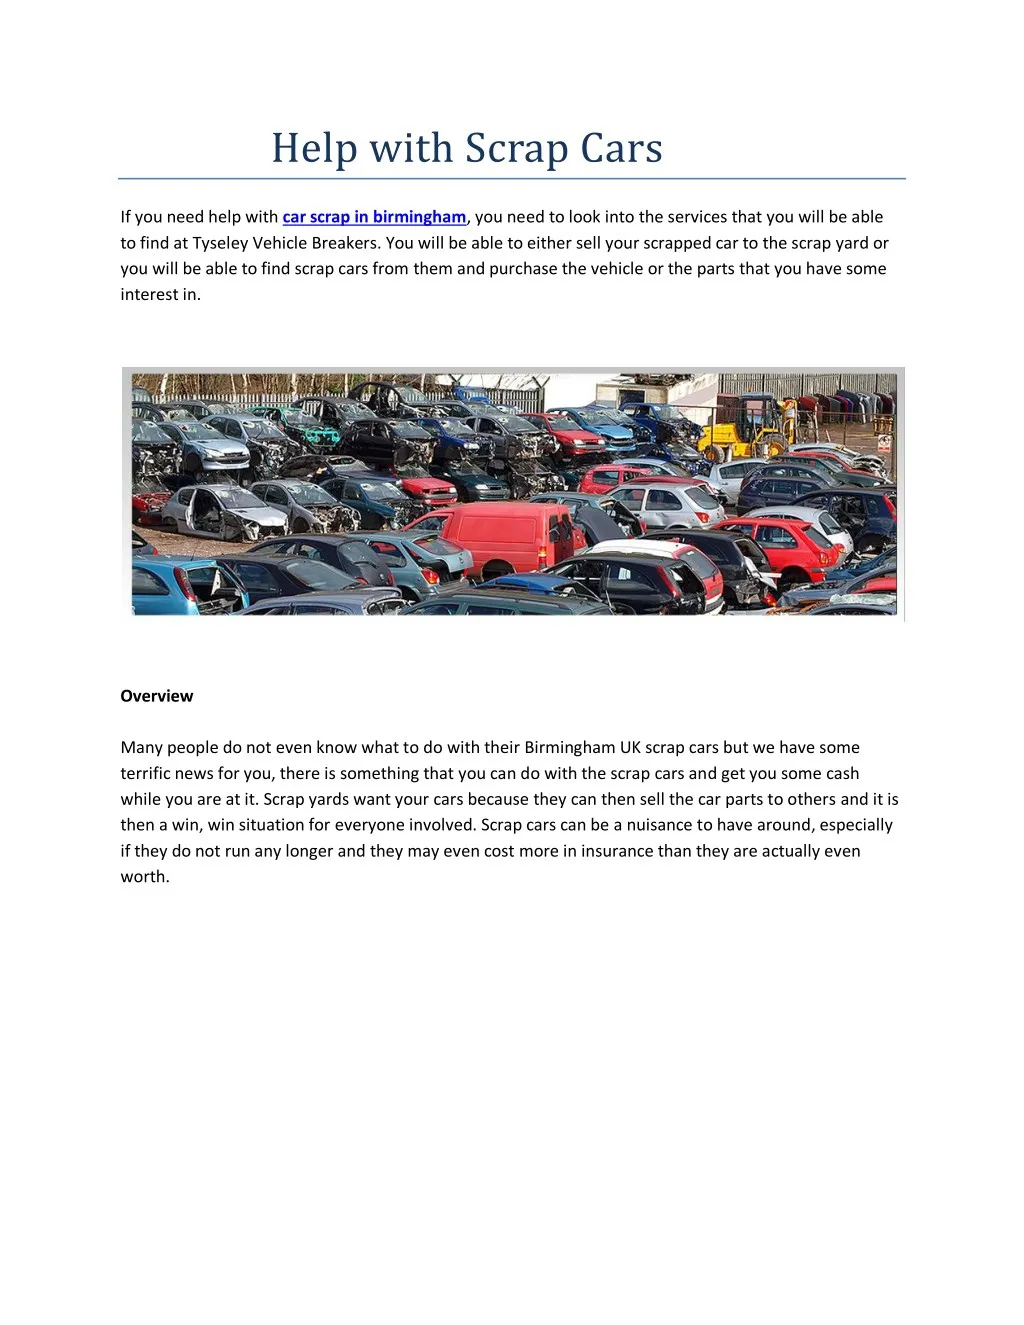 help with scrap cars